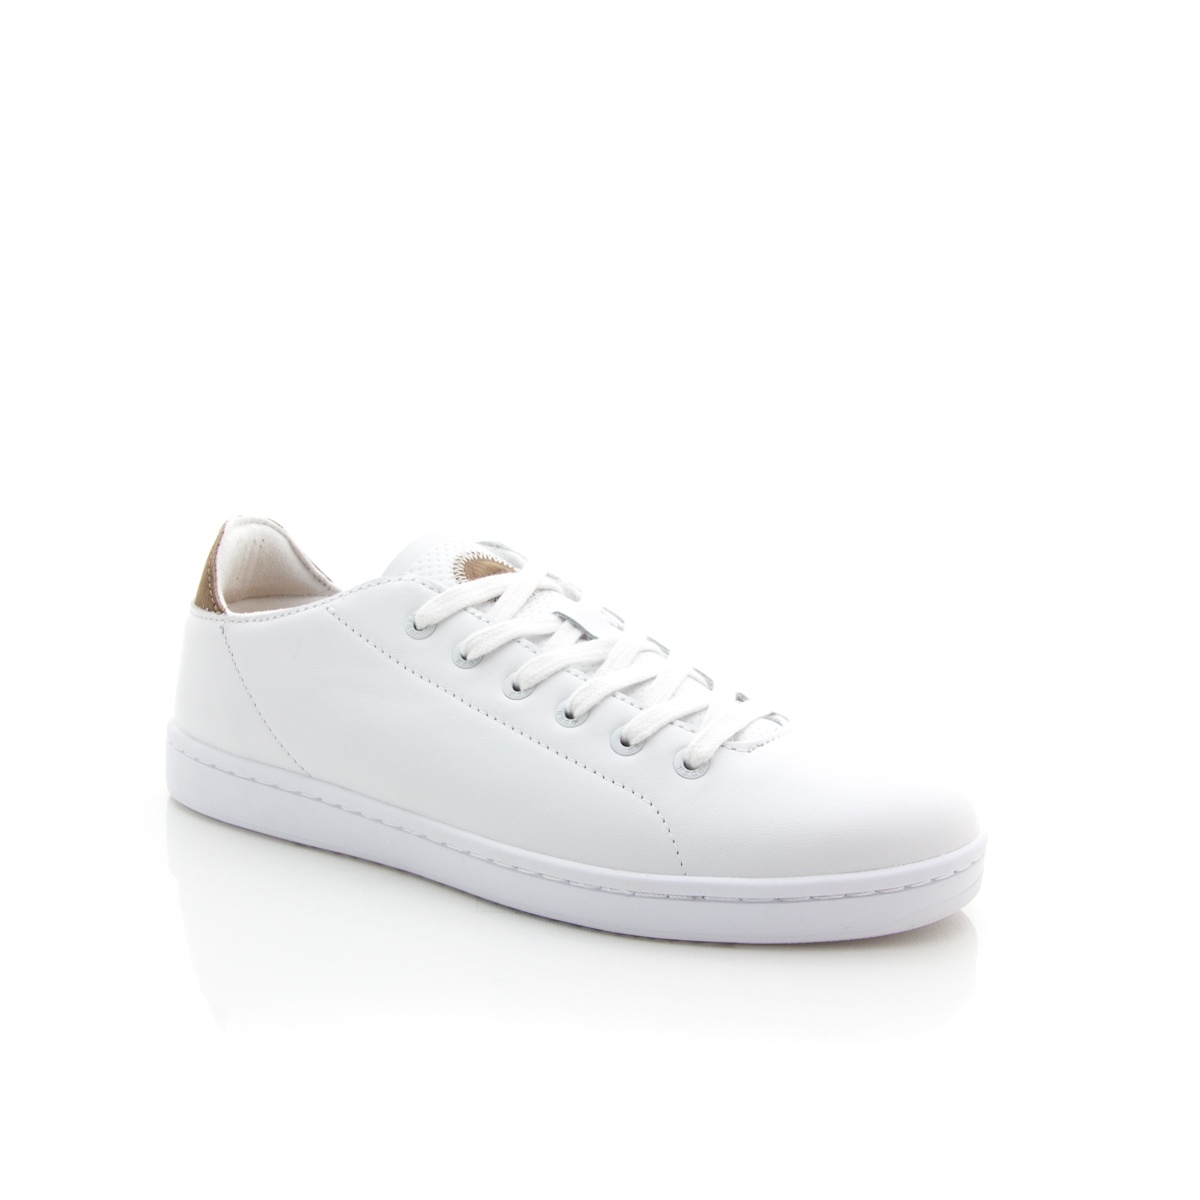 Woden Jane Leather II Bright White - Issimo Shoes